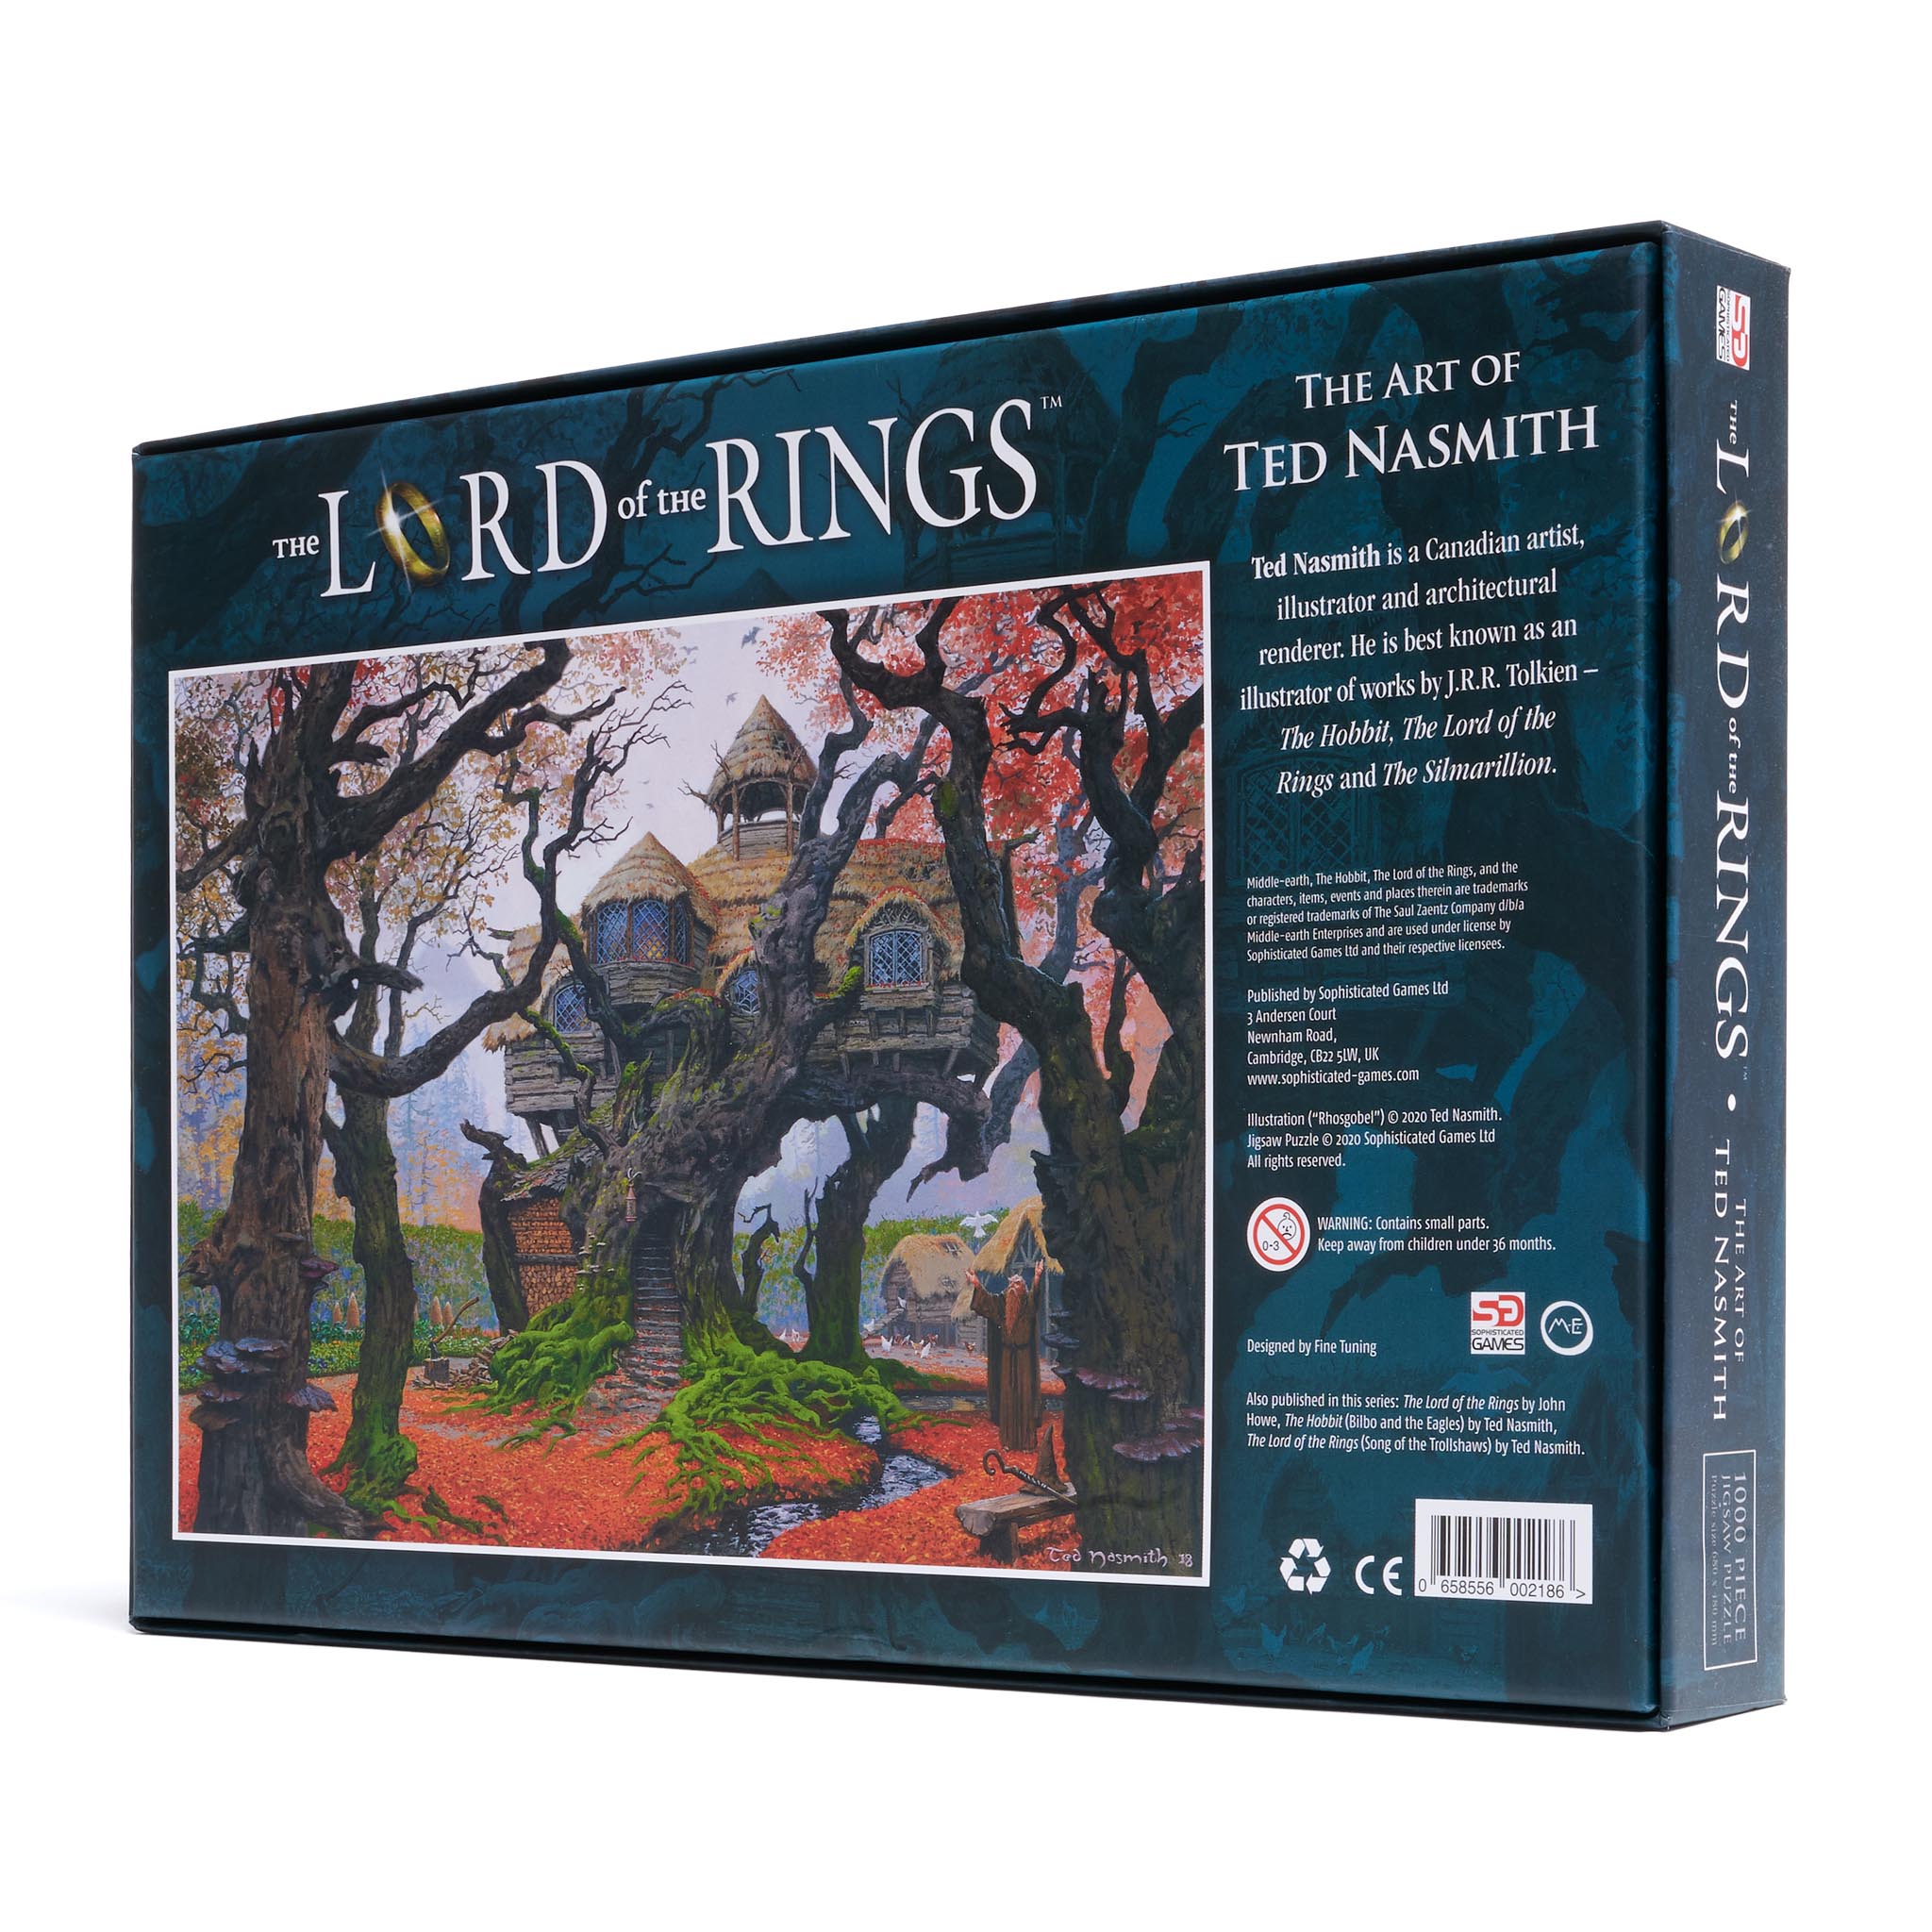 696201 The Lord of the Rings Thames and Kosmos Rhosgobel 1000 Piece Jigsaw Puz 